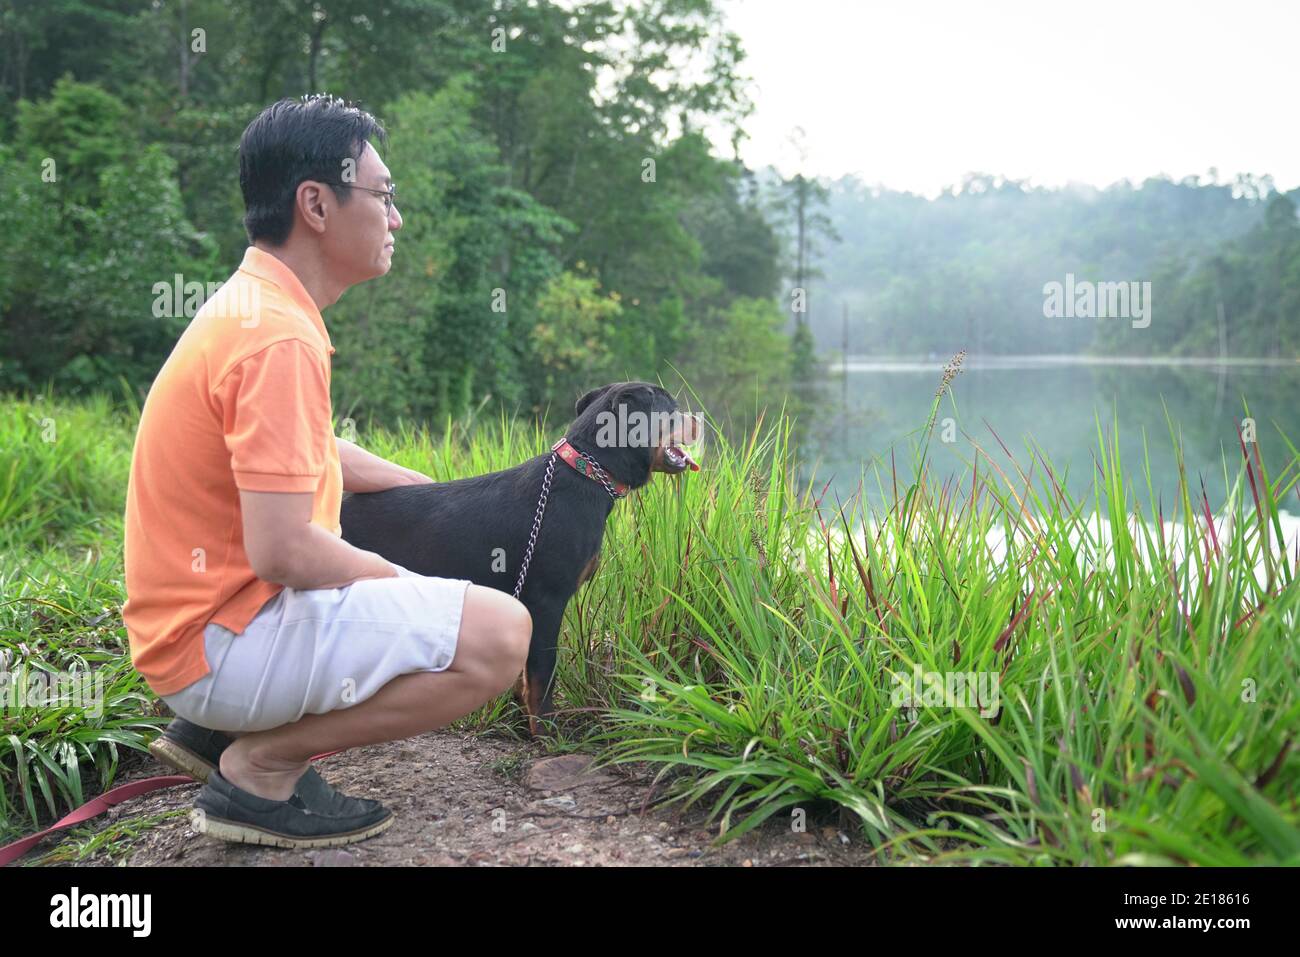 Dog facing foggy lake together with adult man inside a forest. Outdoor recreation concept. Stock Photo